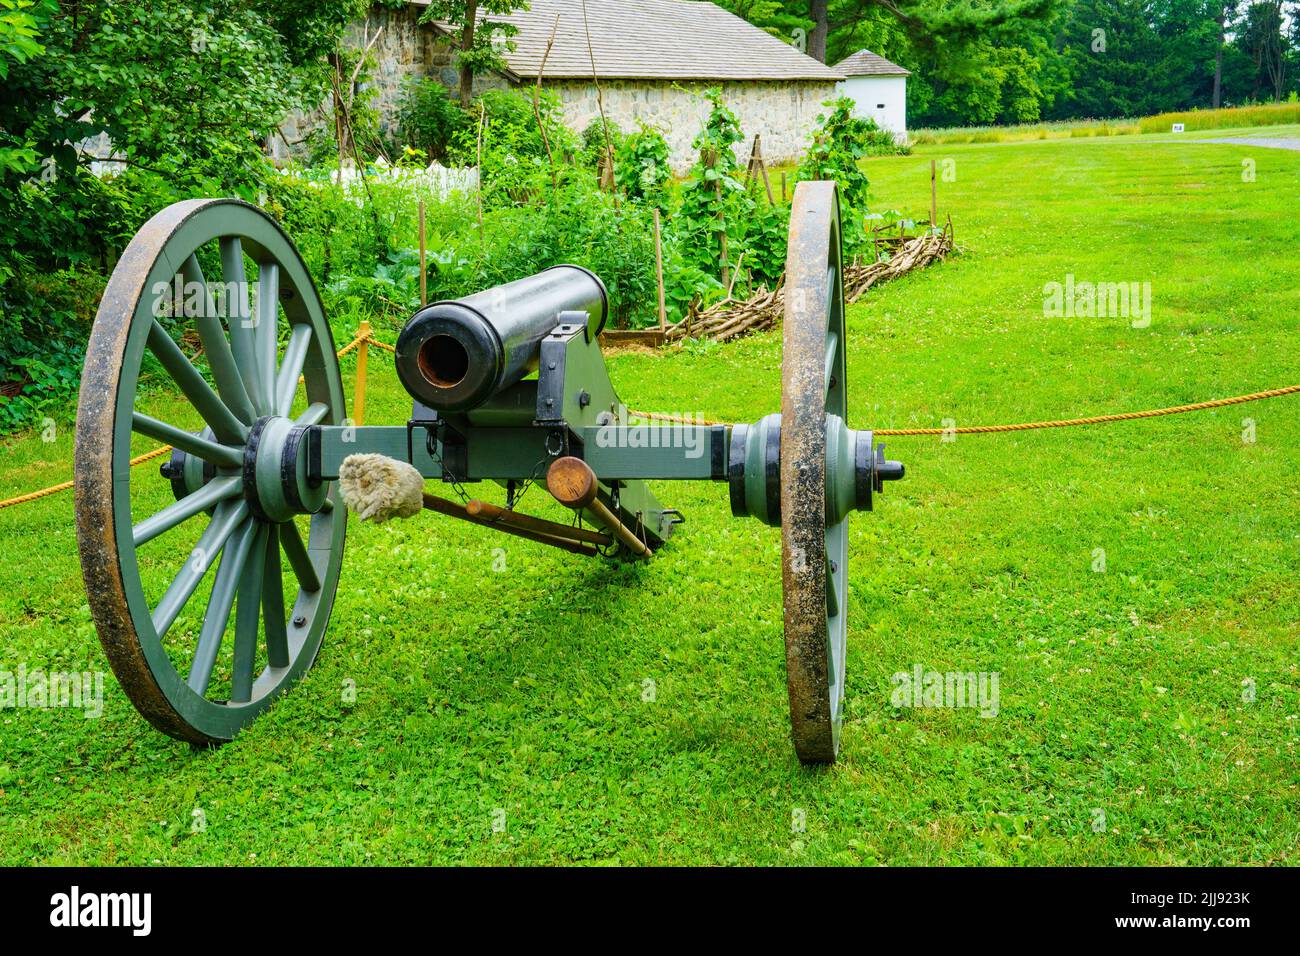 Lancaster, PA, USA – July 16, 2022: A Civil War era cannon on display at the Landis Valley Farm Museum during Civil War Days. Stock Photo